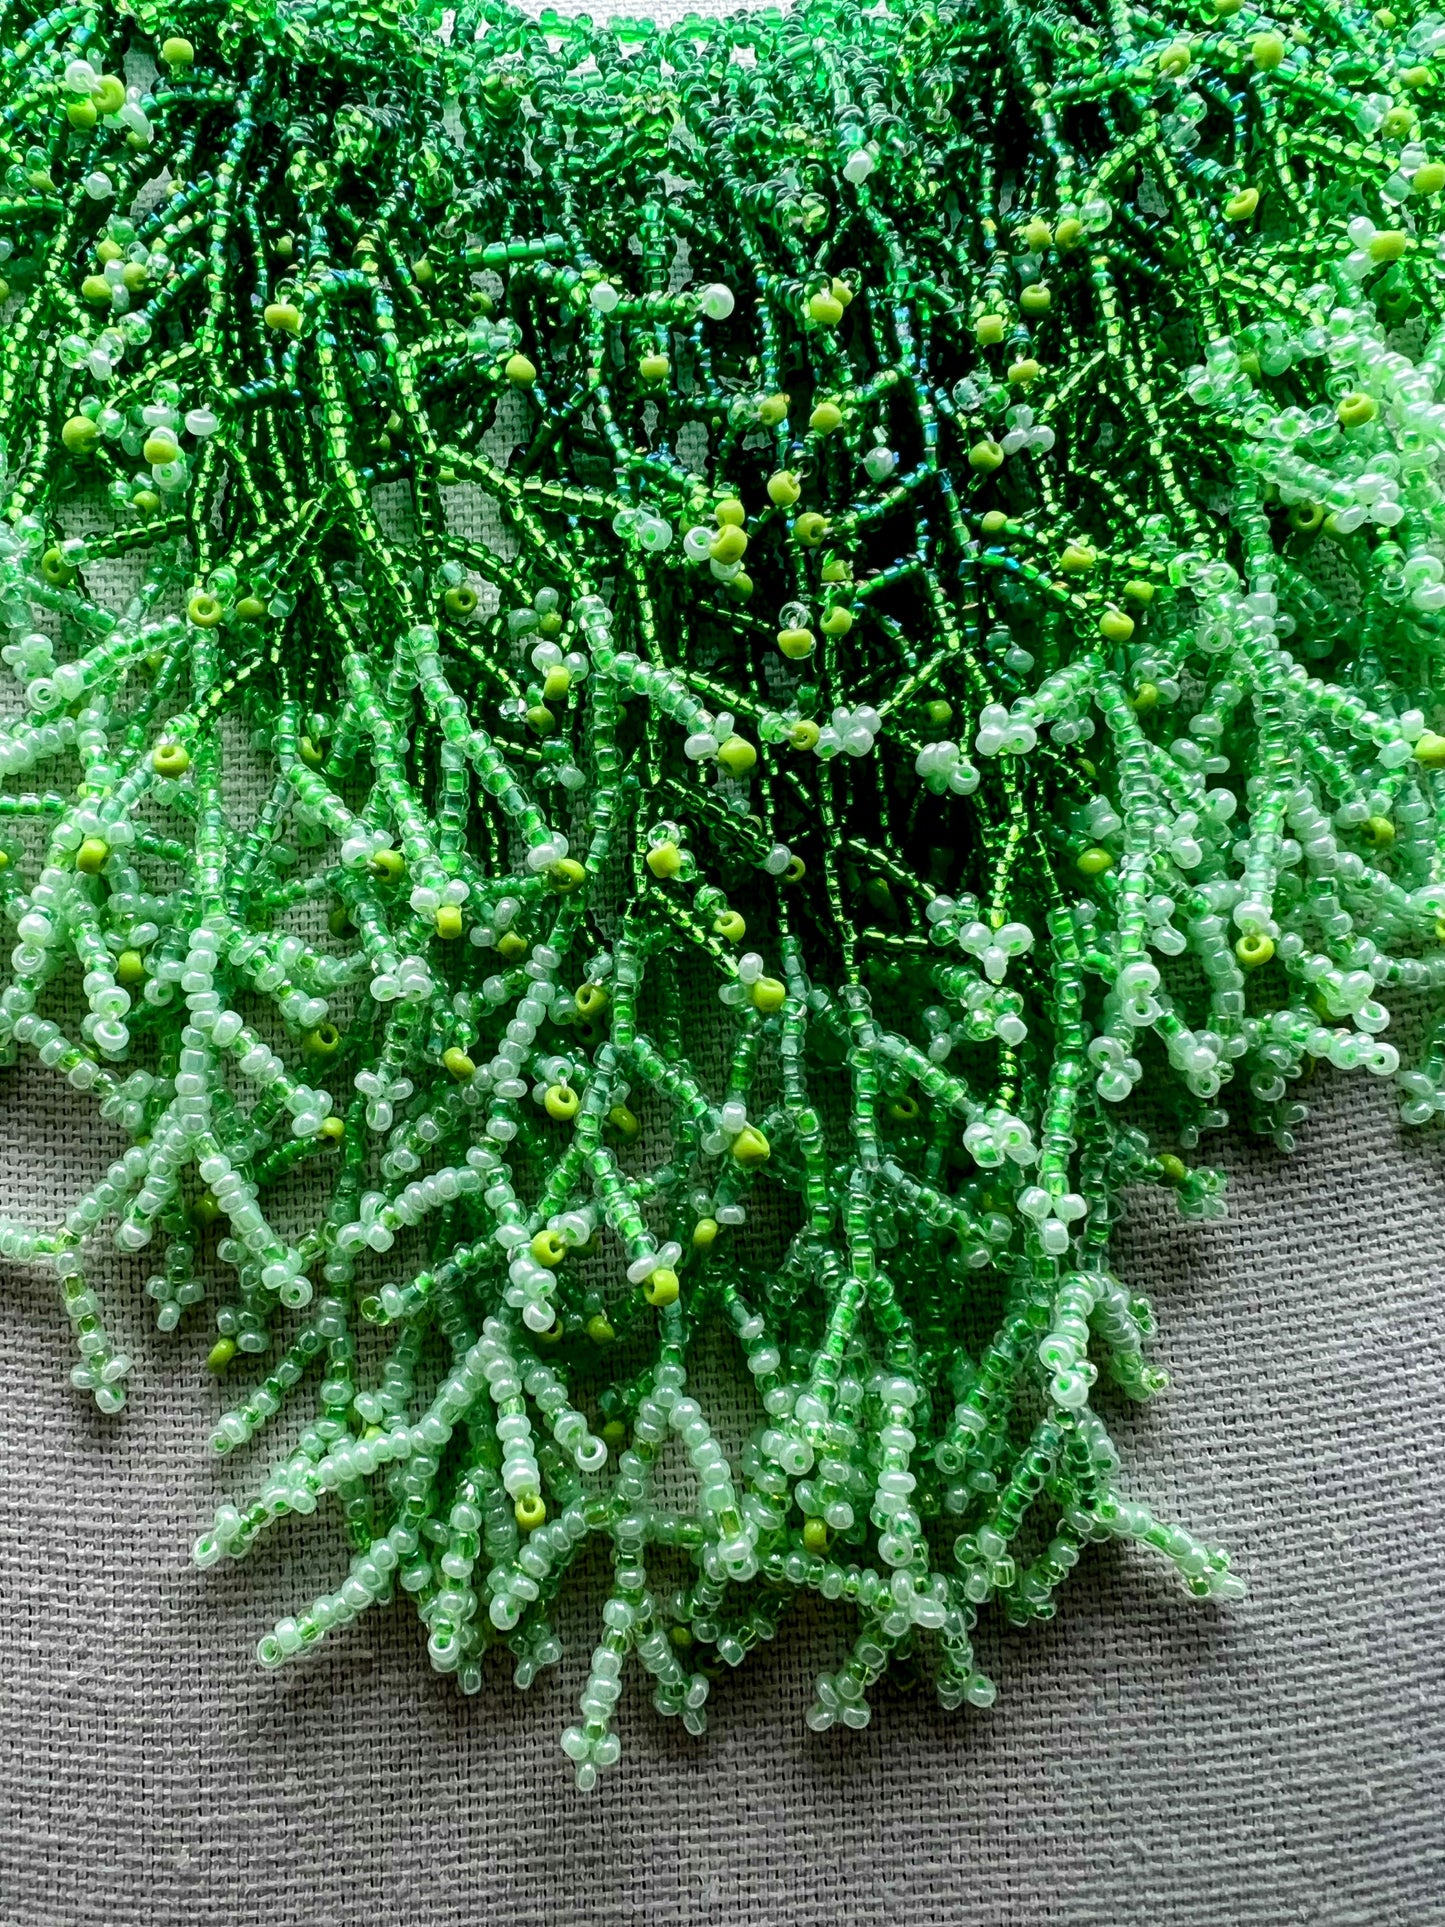 Seaweed Design Dangling Beaded Necklaces